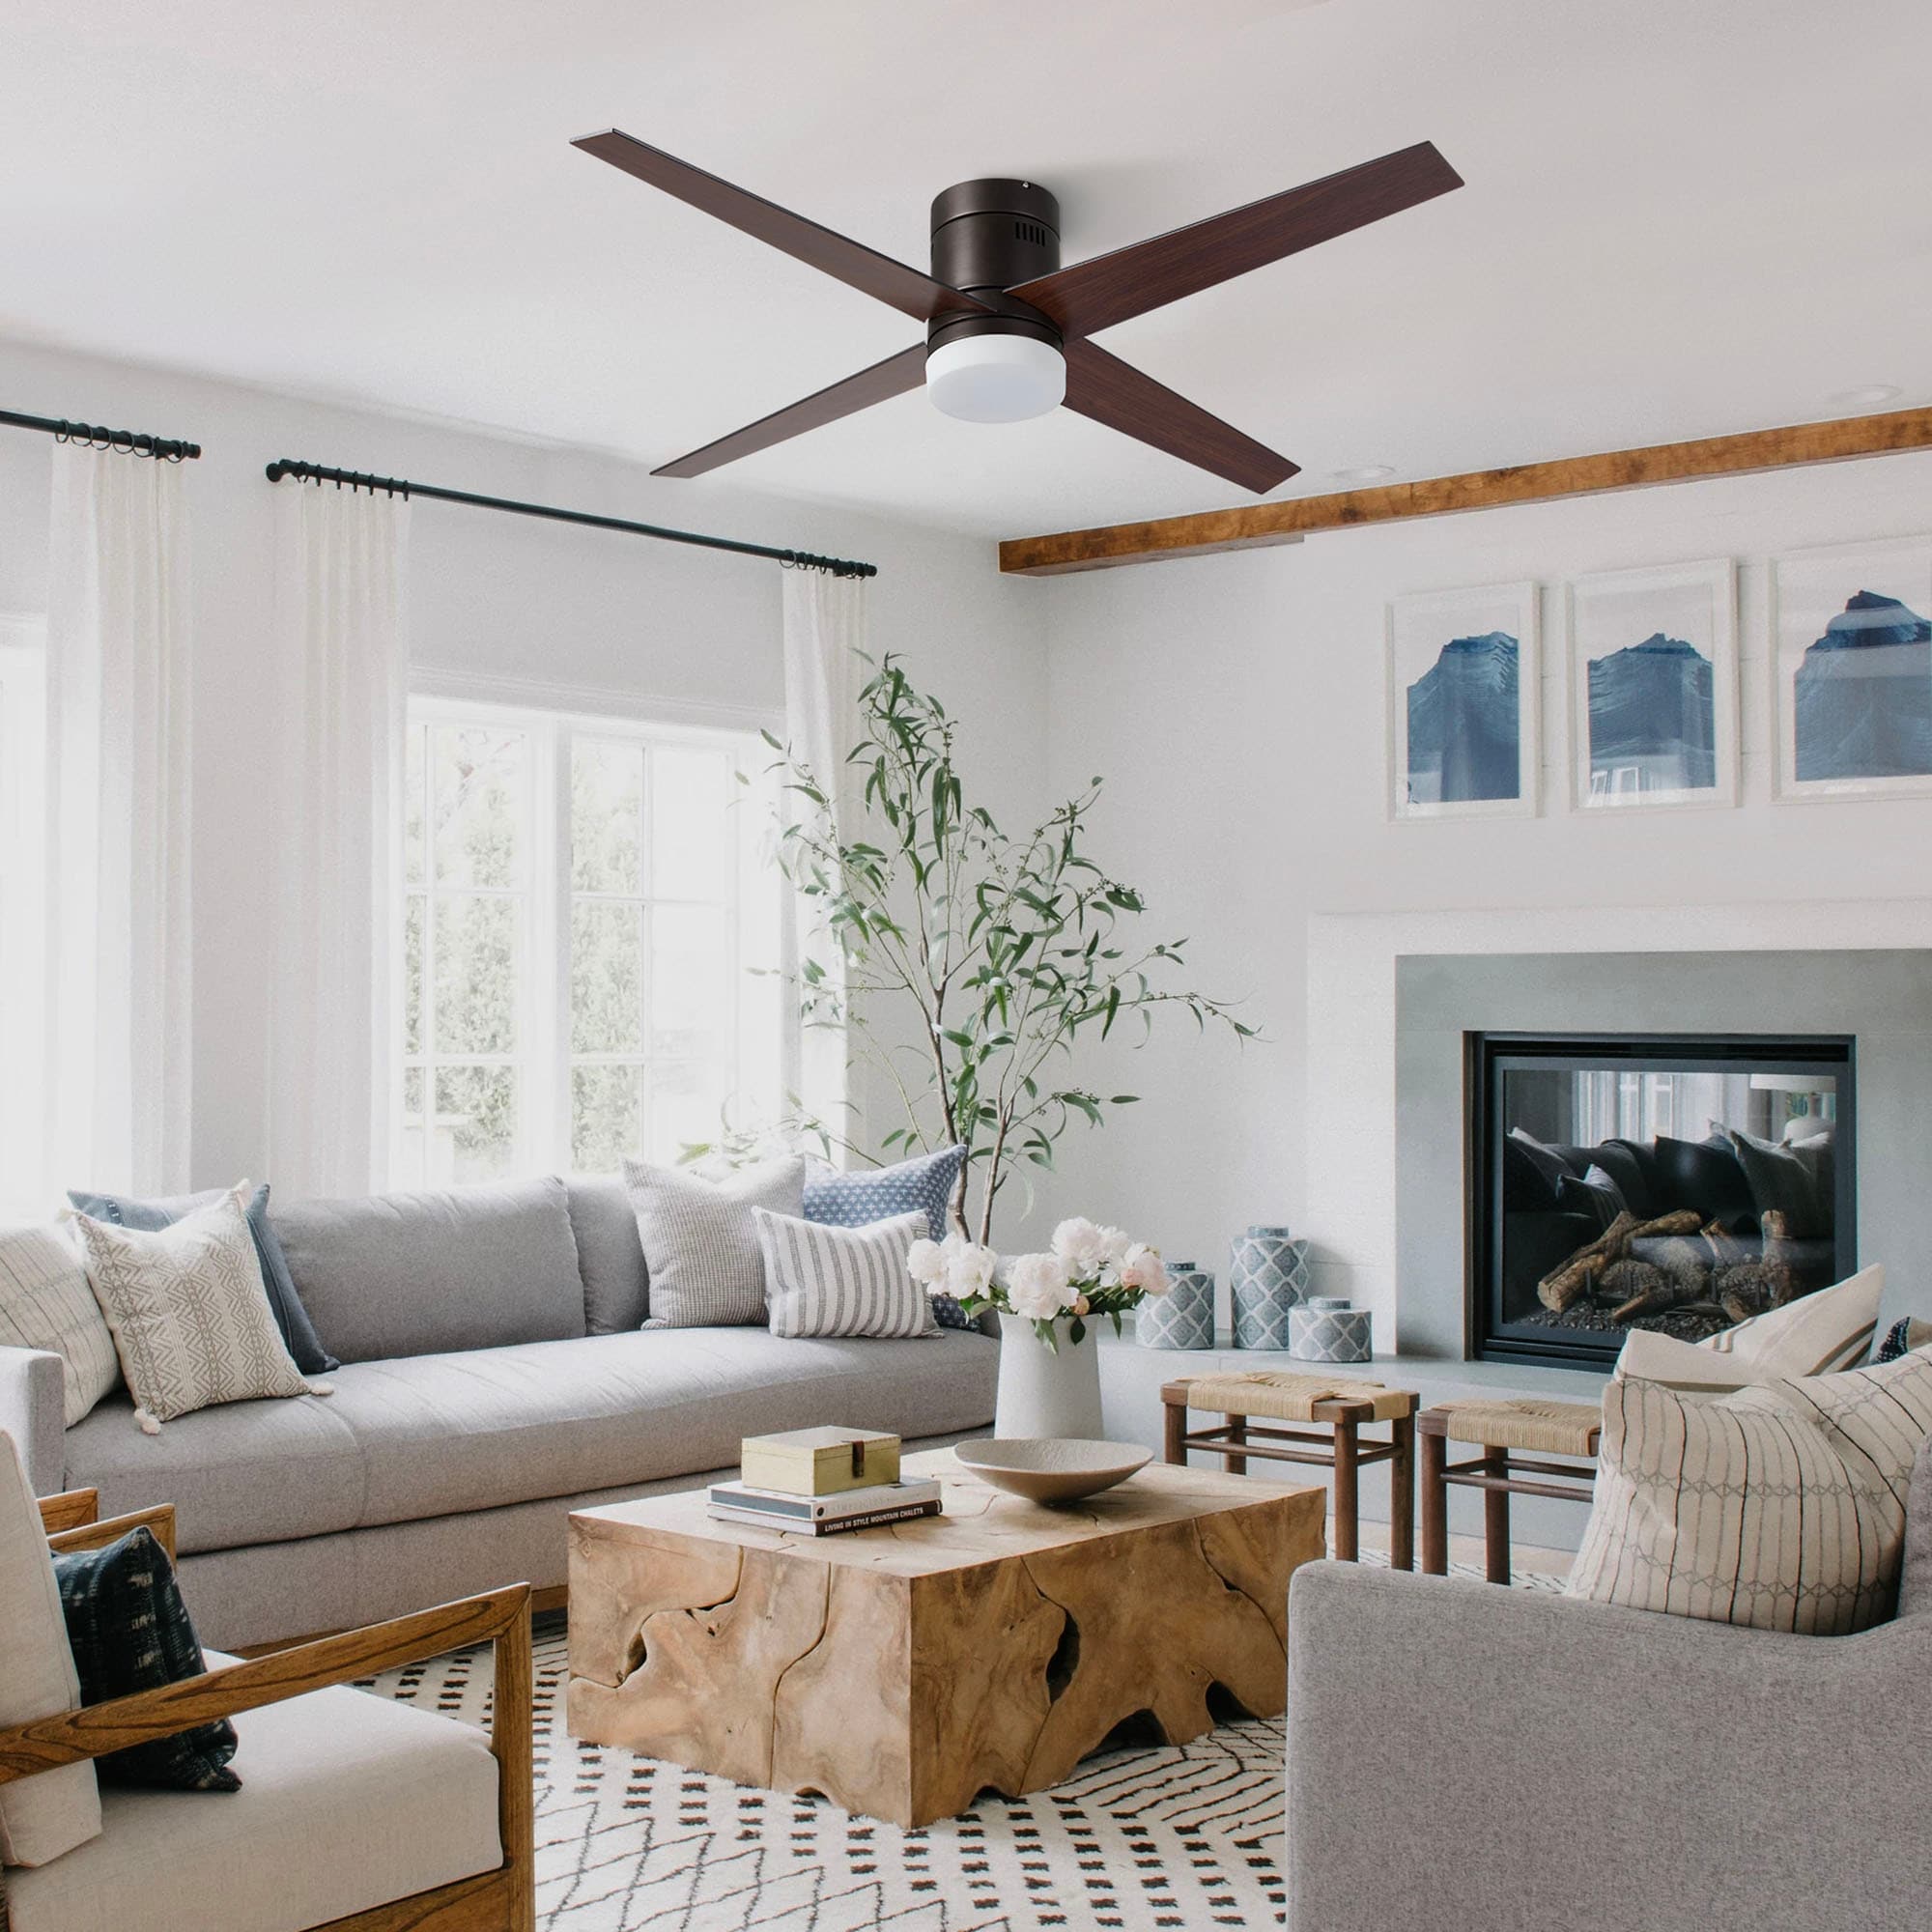 25 Black Ceiling Fan Designs That Look Cool in Any Room